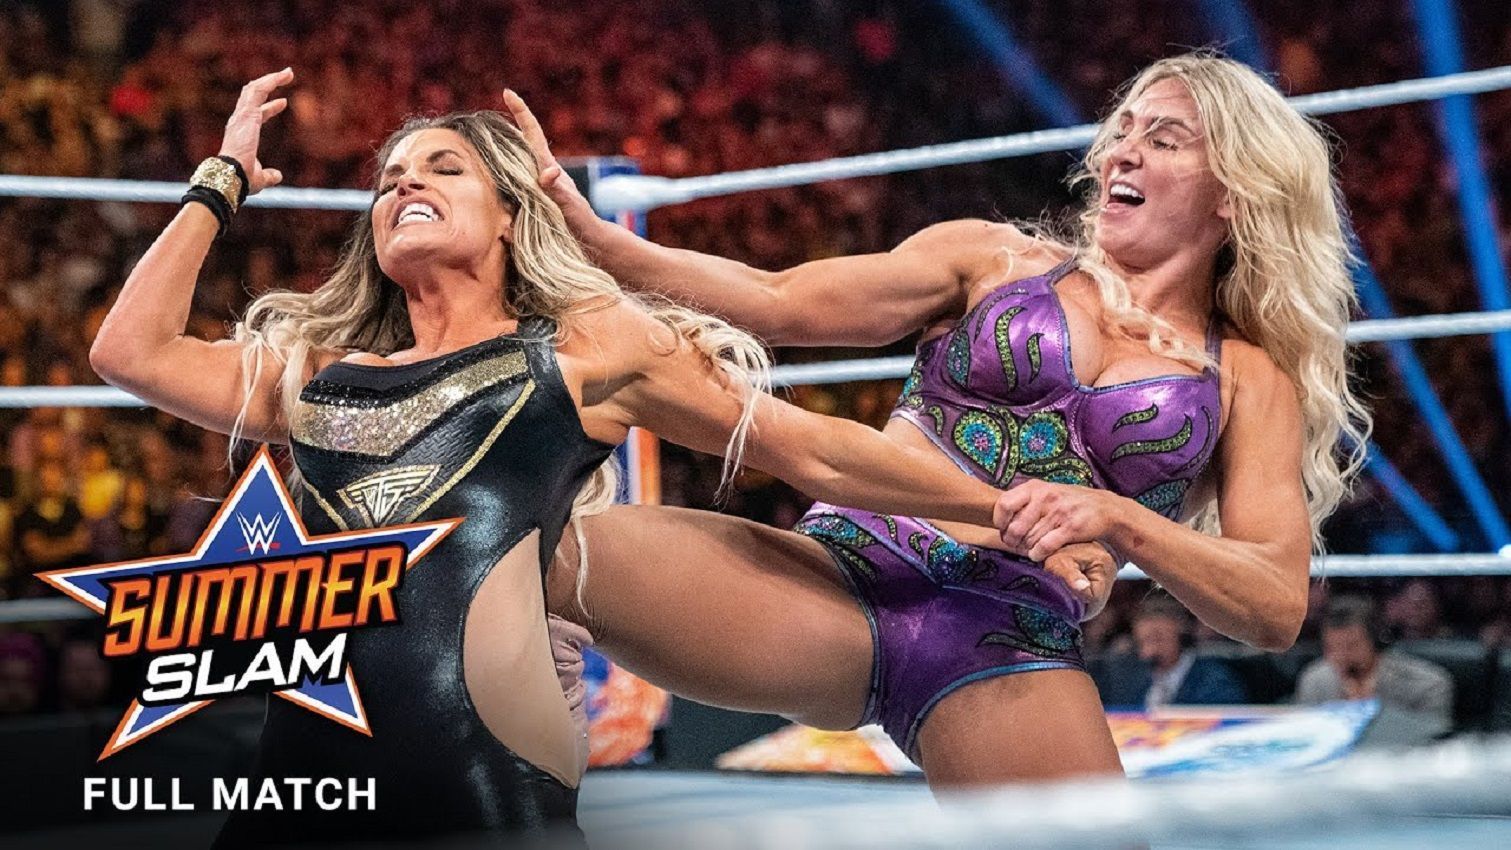 Trish and Charlotte had an epic battle at Summerslam 2019